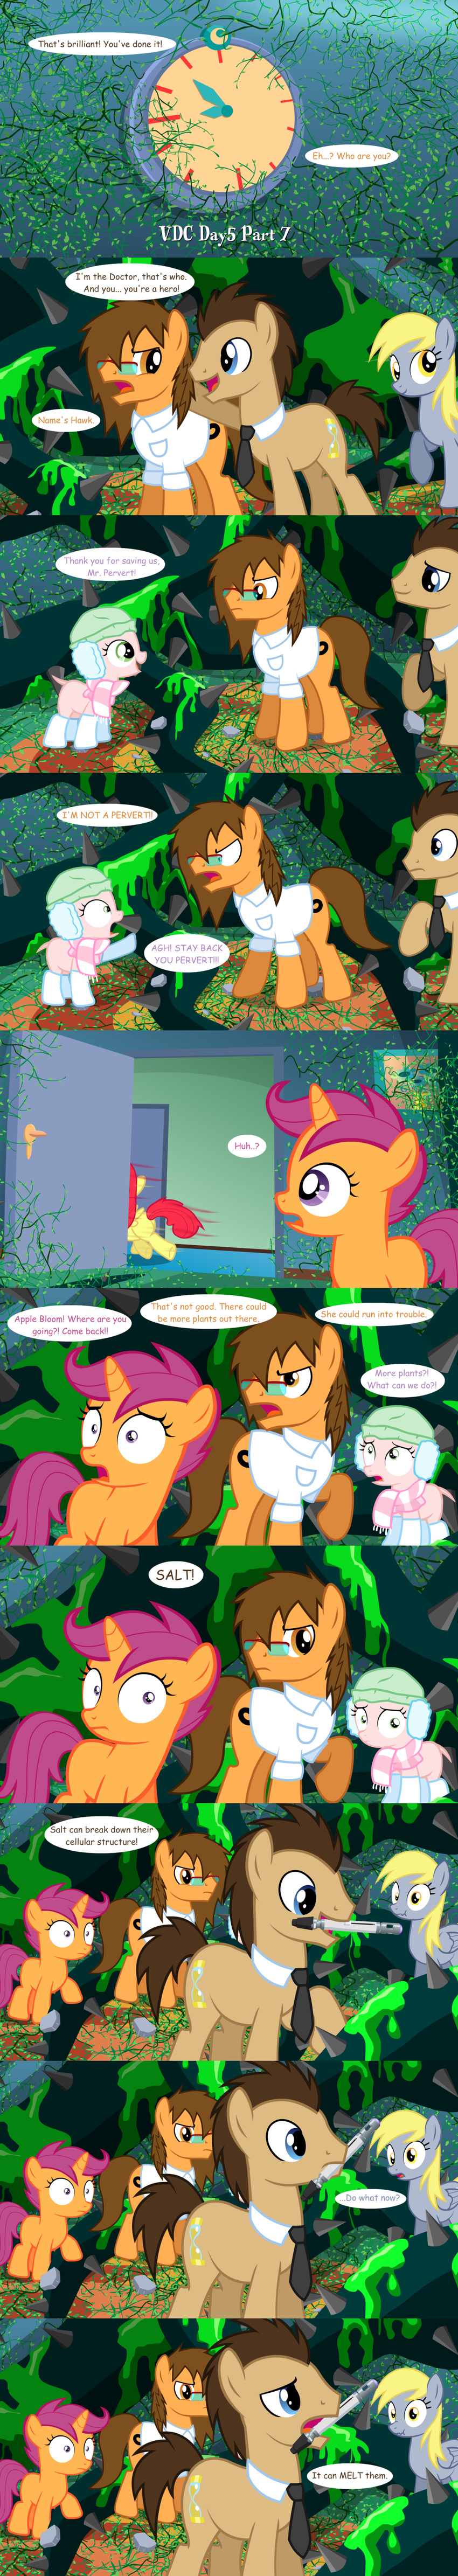 comic cutie_mark_crusaders_(mlp) derpy_hooves_(mlp) doctor_whooves_(mlp) earmuffs epic_fail equine female feral friendship_is_magic hat horn horse jananimations mammal my_little_pony original_character pegasus pony scared scarf scootaloo_(mlp) sweetie_belle_(mlp) tentacles tumblr unicorn vines wings young